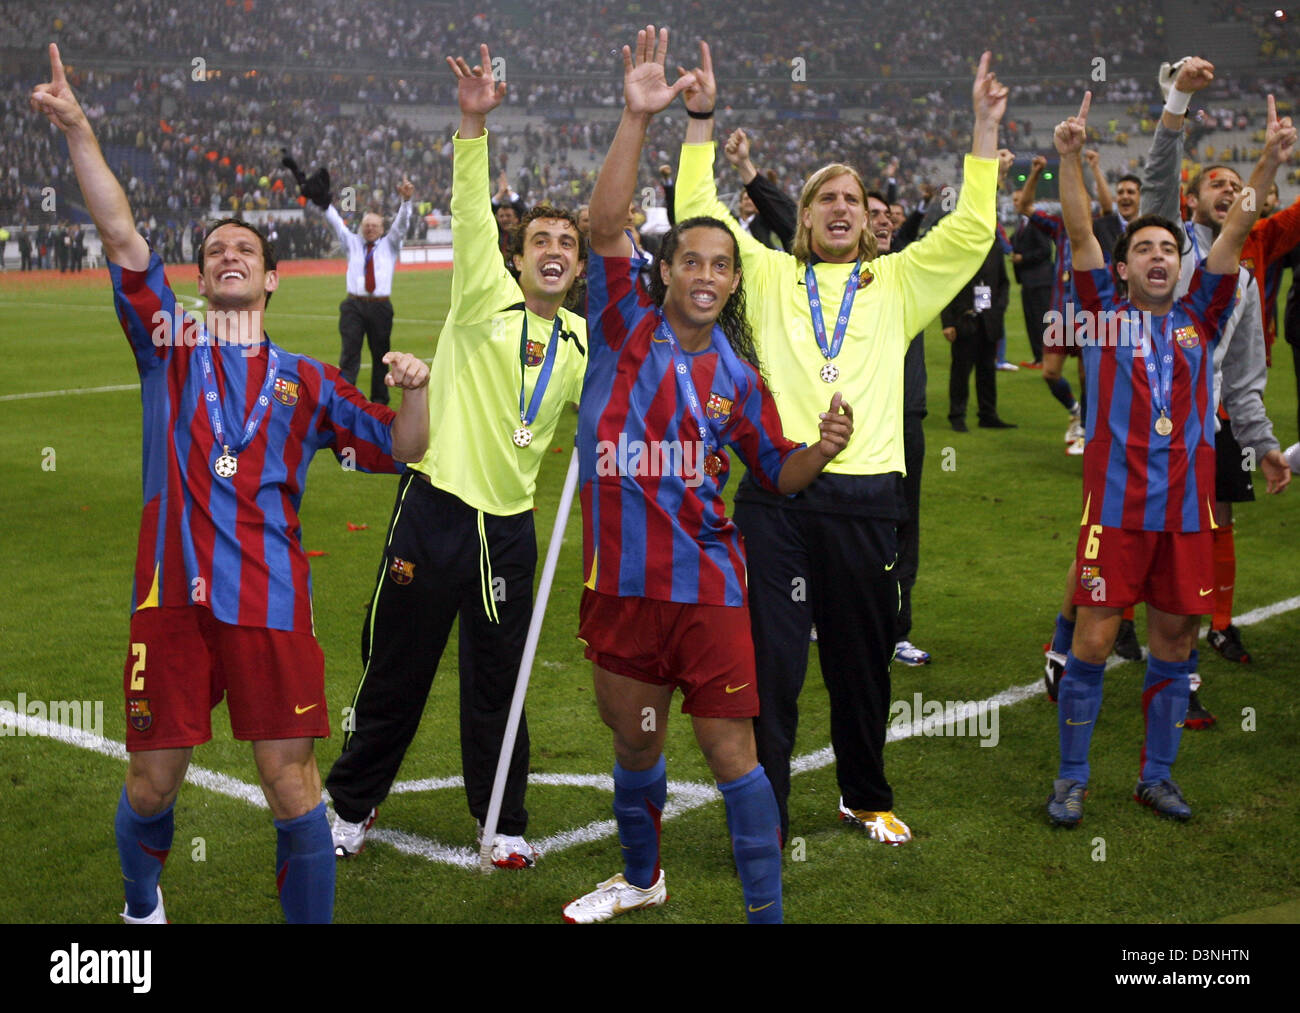 The players Juliano Belletti, Gabri Garcia, Ronaldinho, Maxi Lopez and Xavi Hernandez (L-R) of FC Barcelona celebrate their triumph over Arsenal London after the UEFA Champions league final match 2006 at the Stade de France in Paris, France, Wednesday, 17 May 2006. Barcelona won the match 2-1 after coming back from Arsenal's first half 1-0 lead. Photo: Andreas Gebert Stock Photo